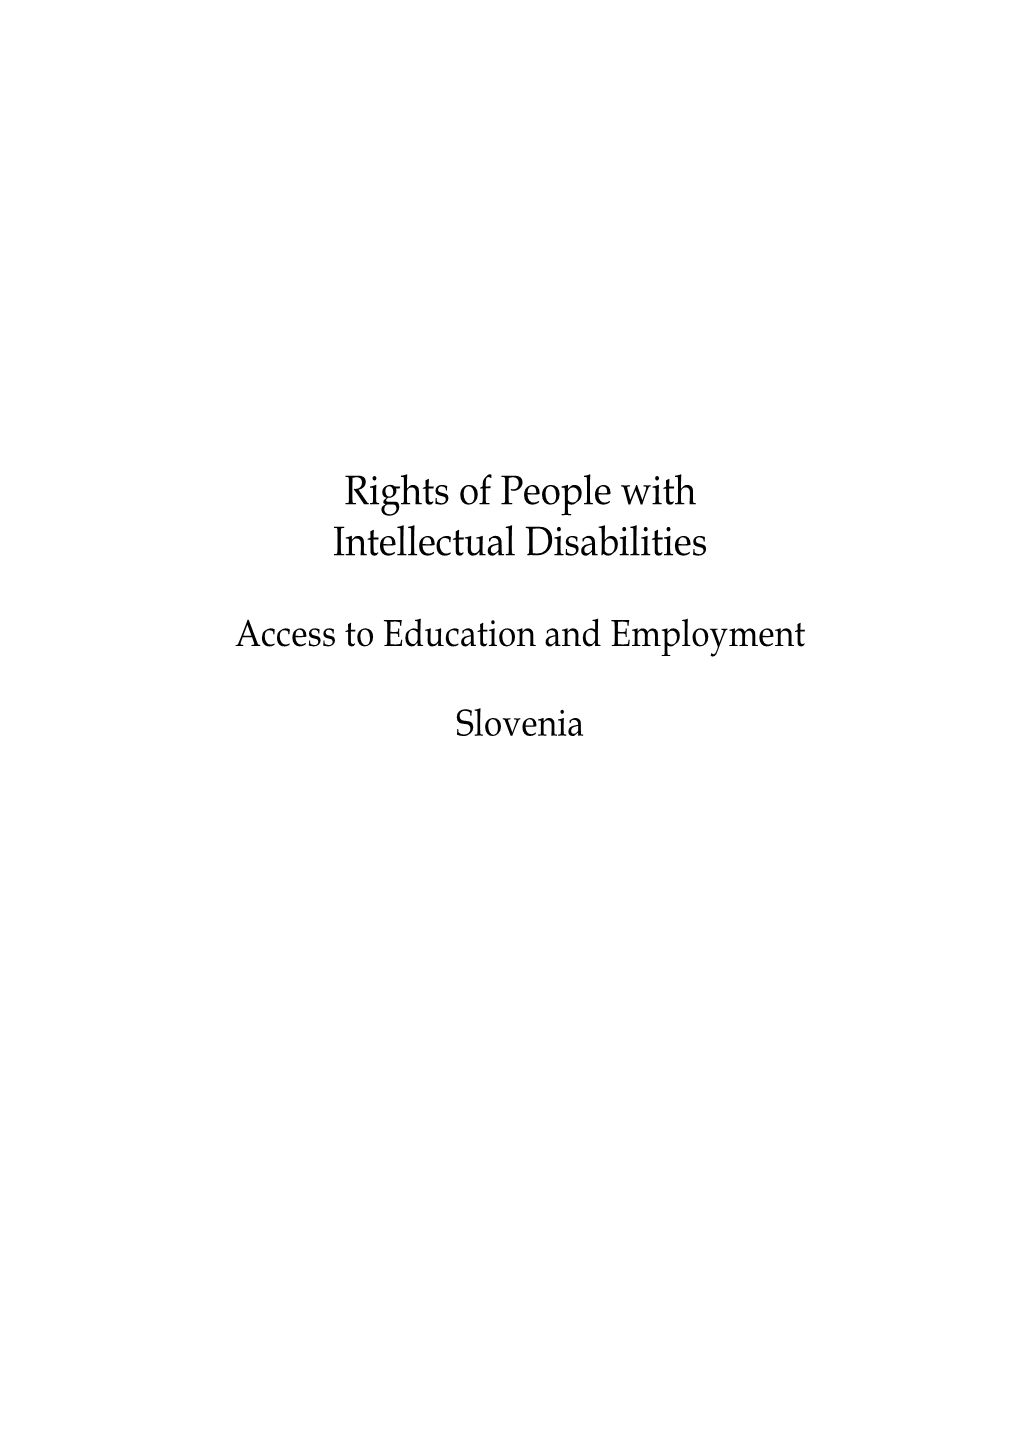 Rights of People with Intellectual Disabilities: Access to Education